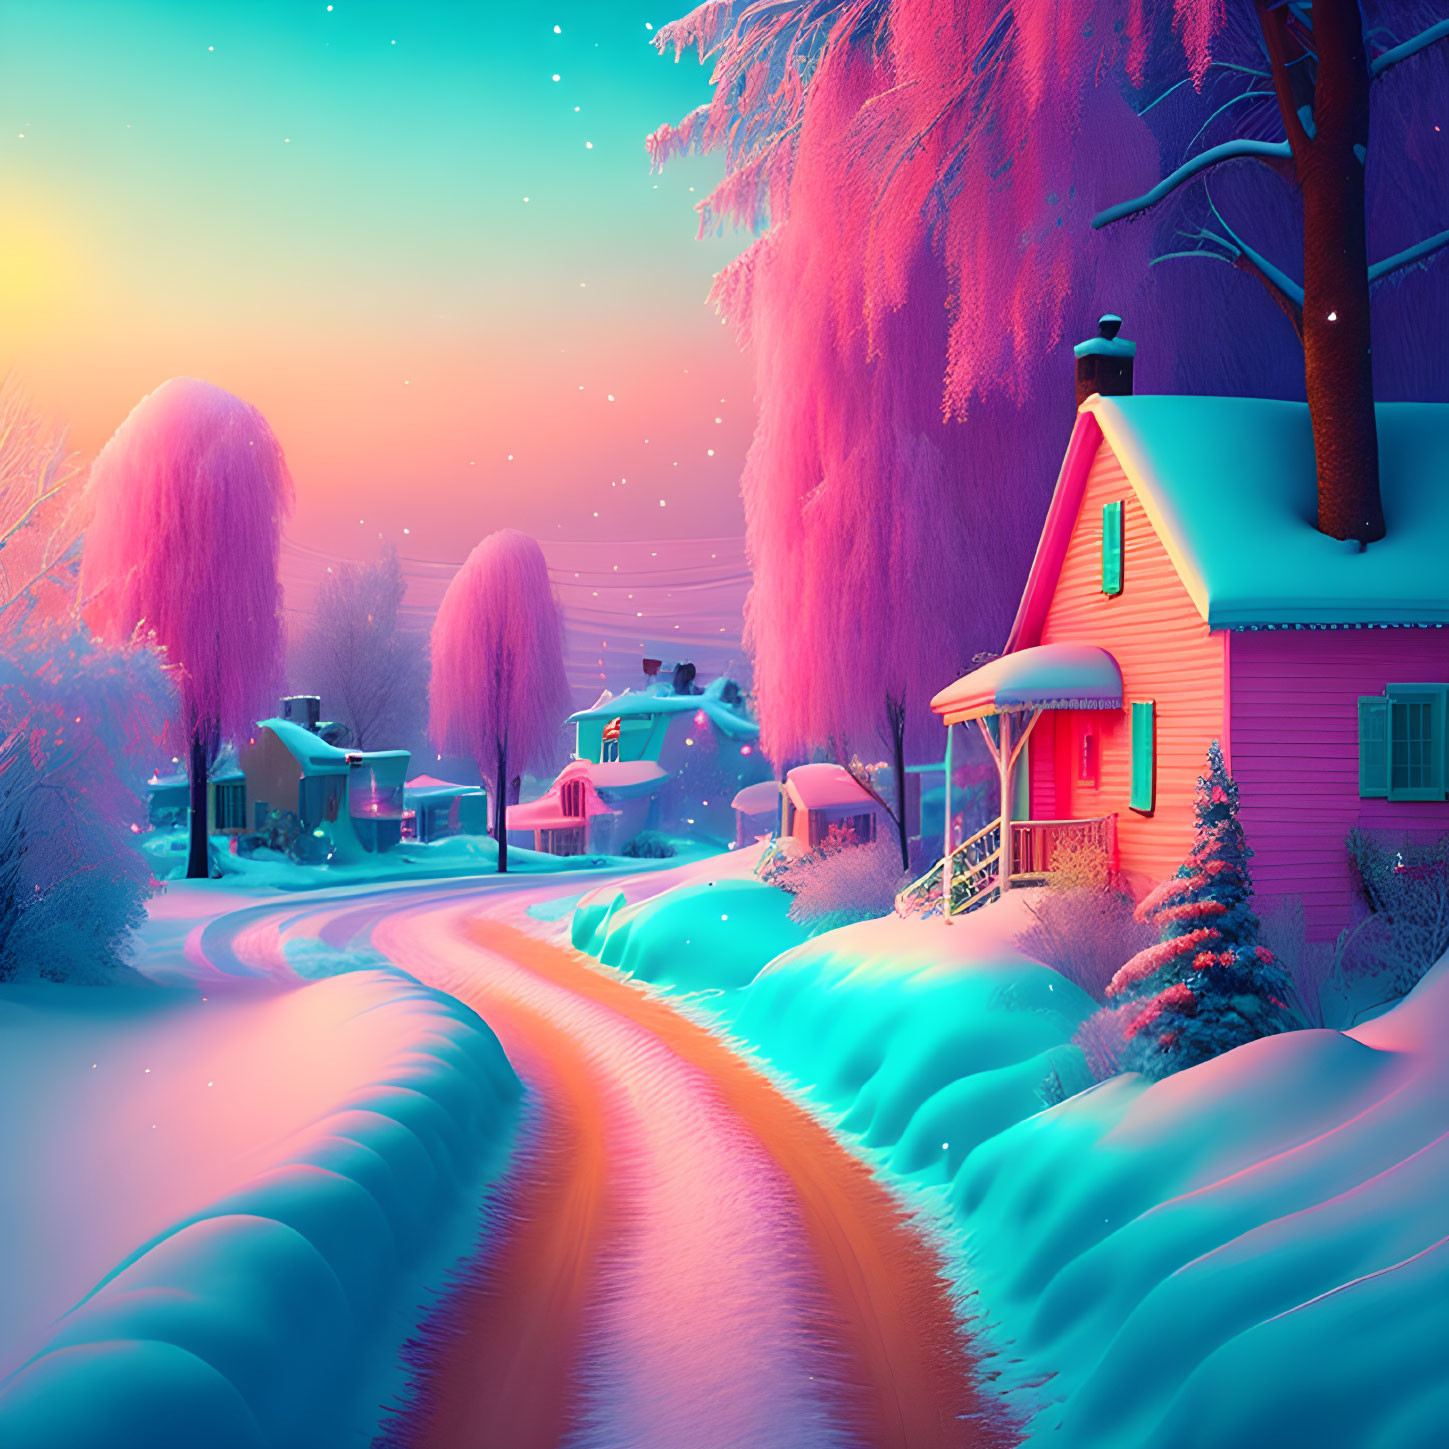 Snow-covered trees and pink glowing house in colorful winter scene